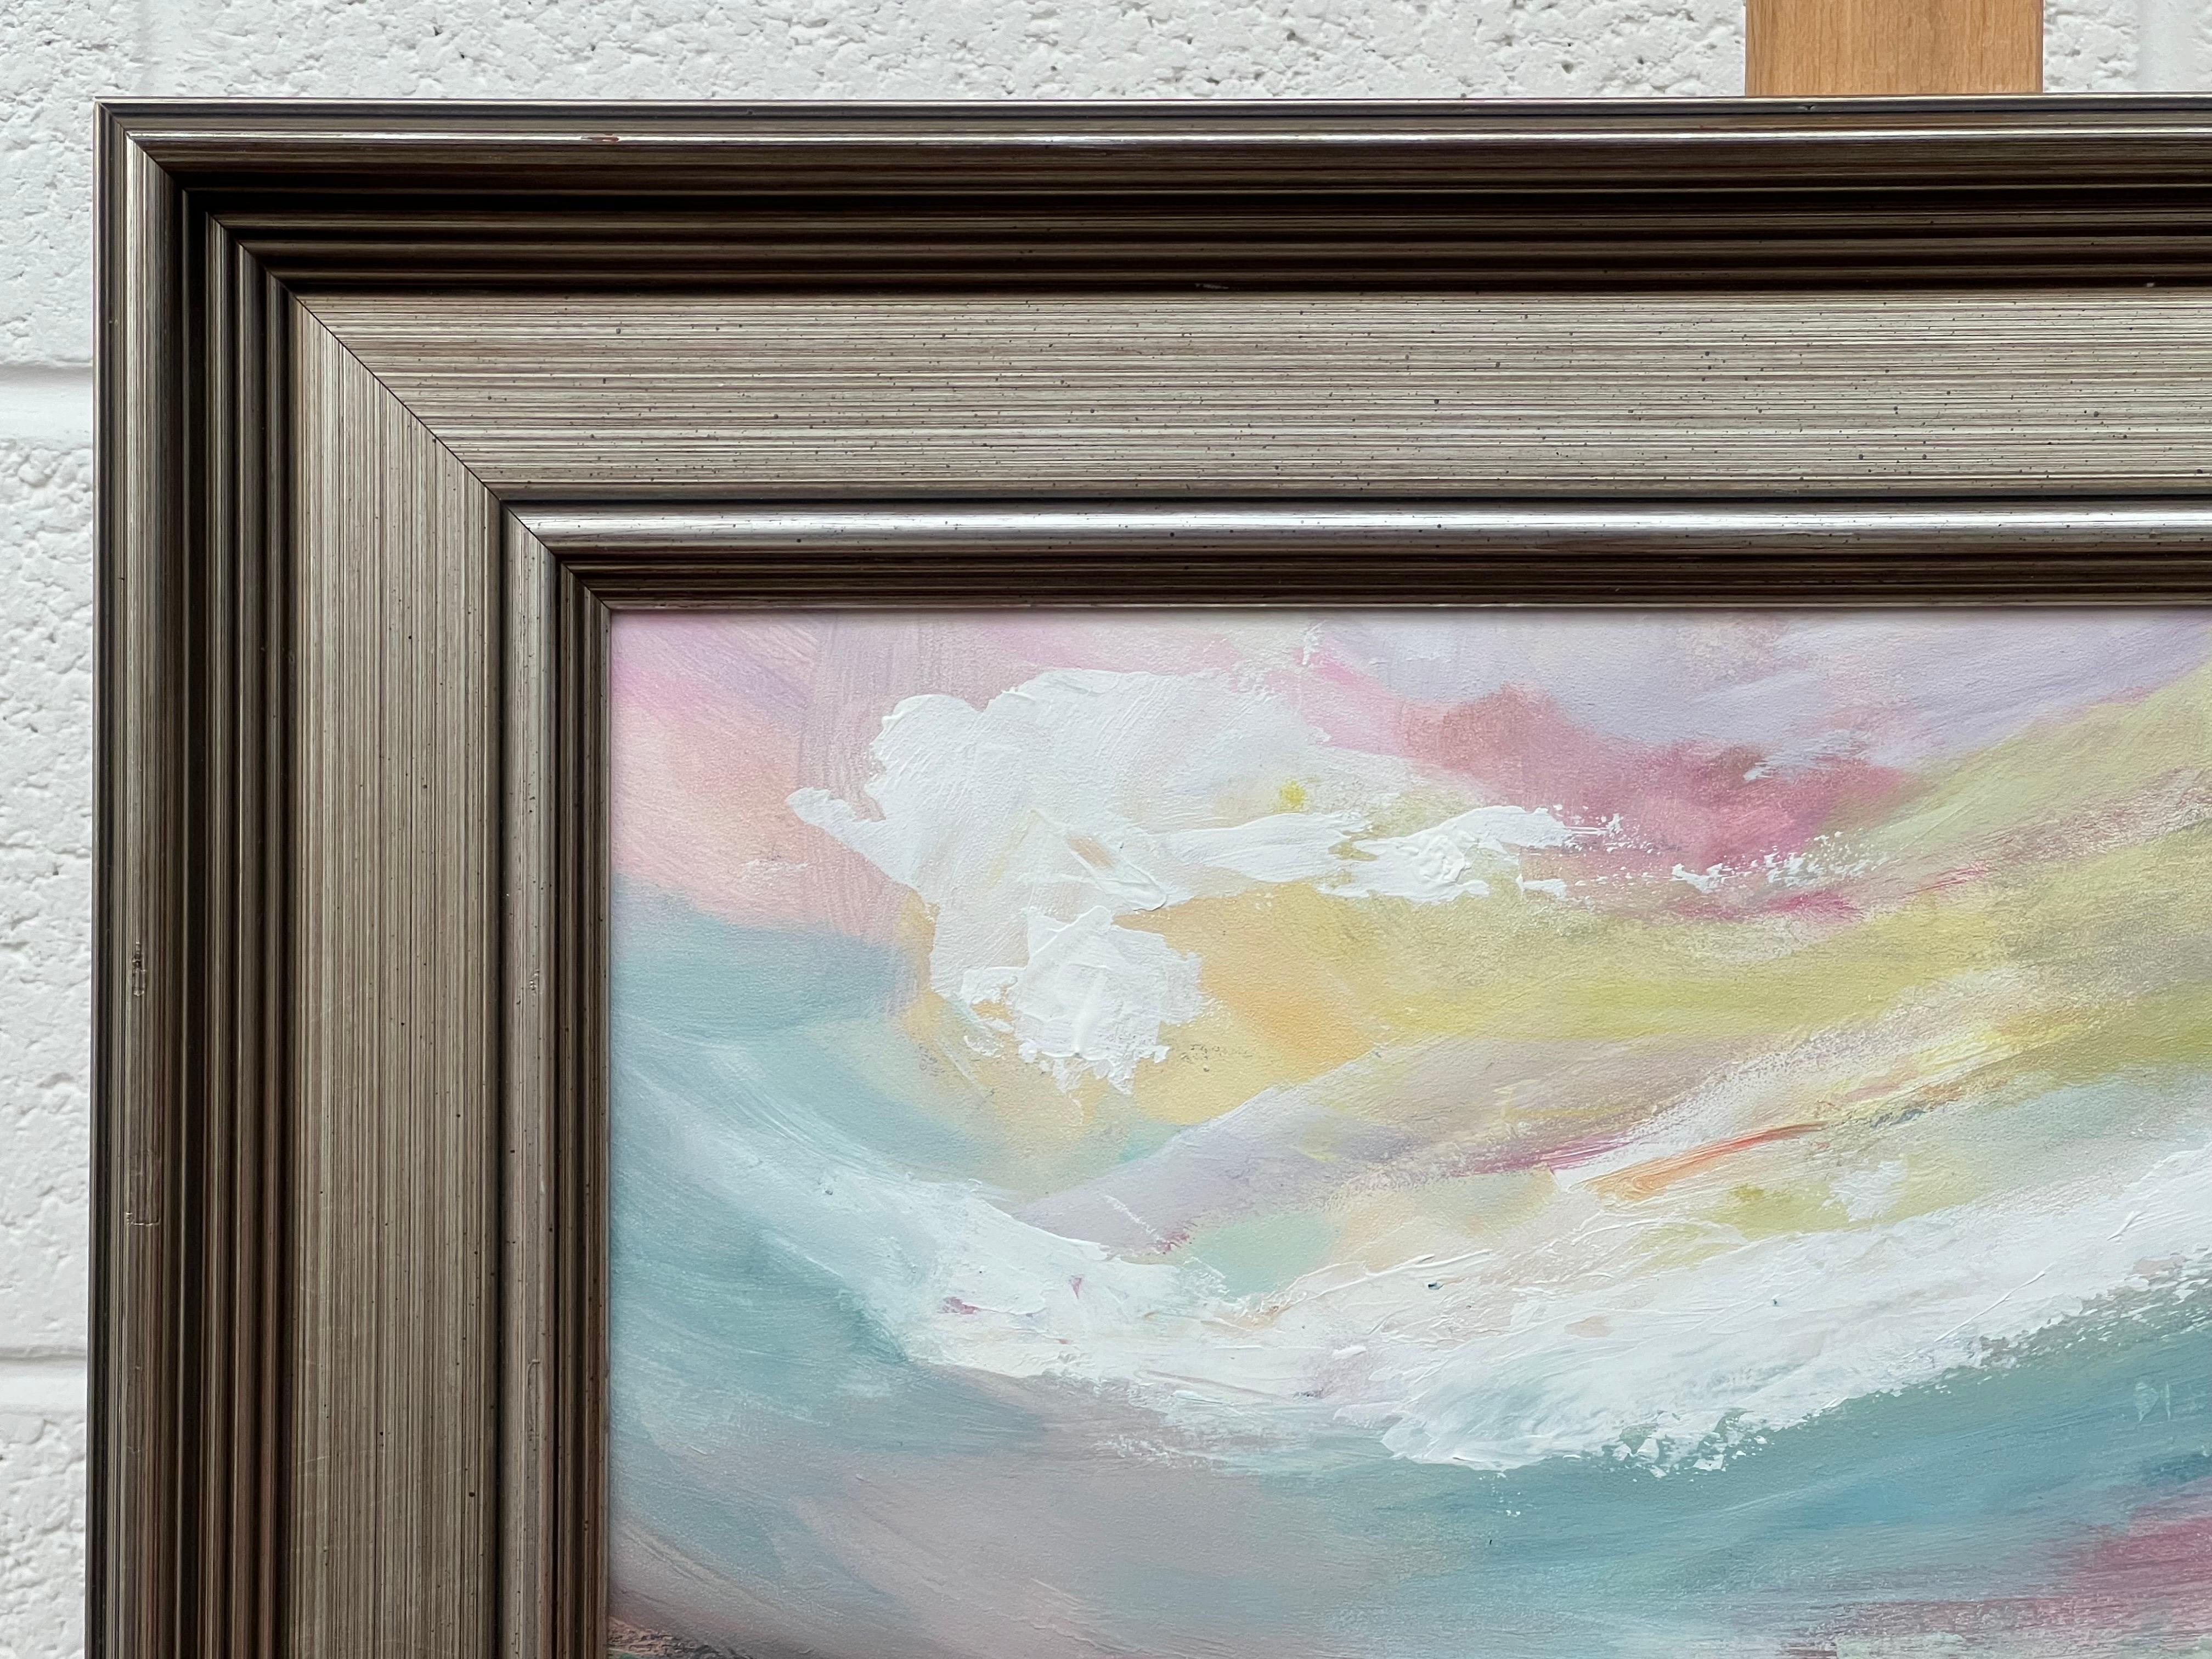 Abstract Landscape Seascape Art with Pink Blue & White Sky by British Artist For Sale 6